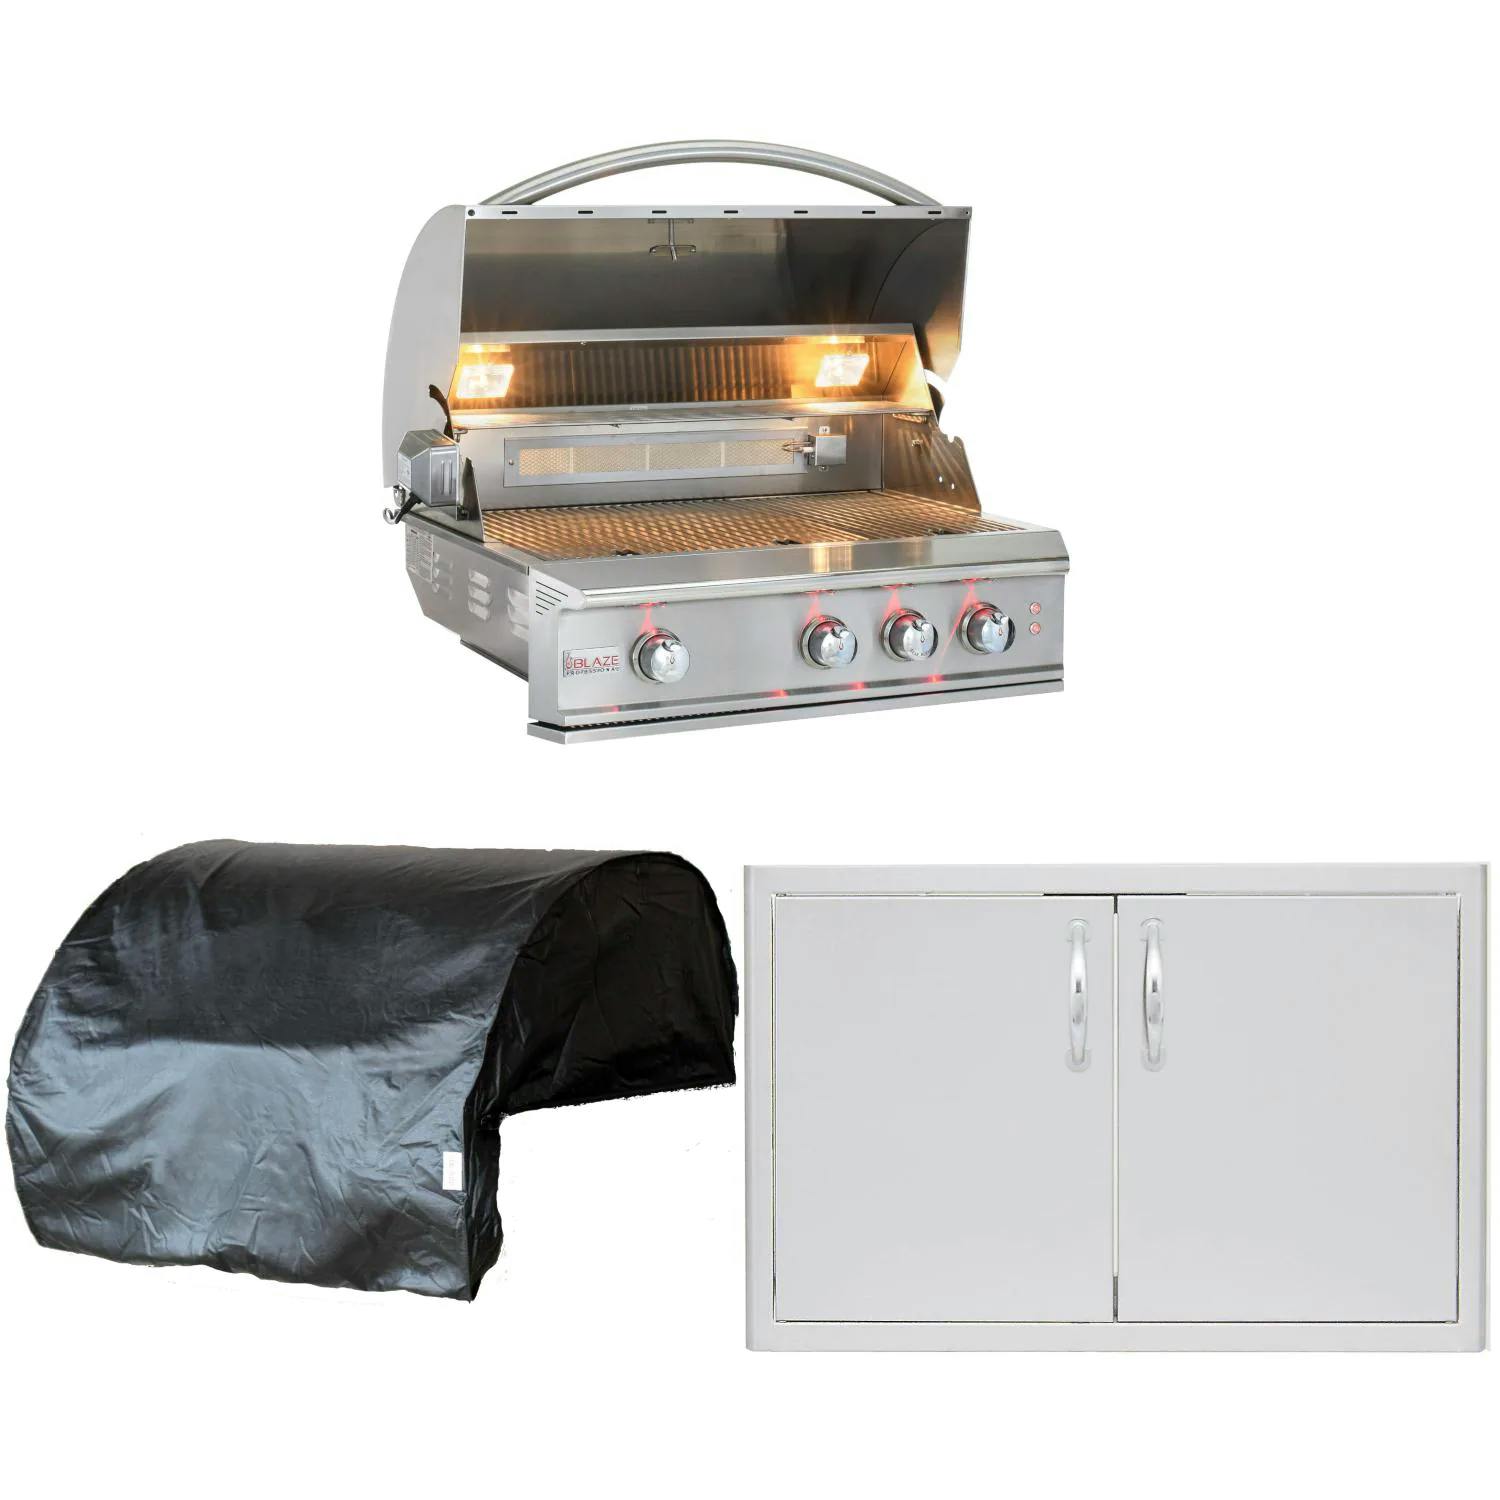 Blaze Professional LUX 3-Piece Outdoor Kitchen Package · 34 in. · Natural Gas